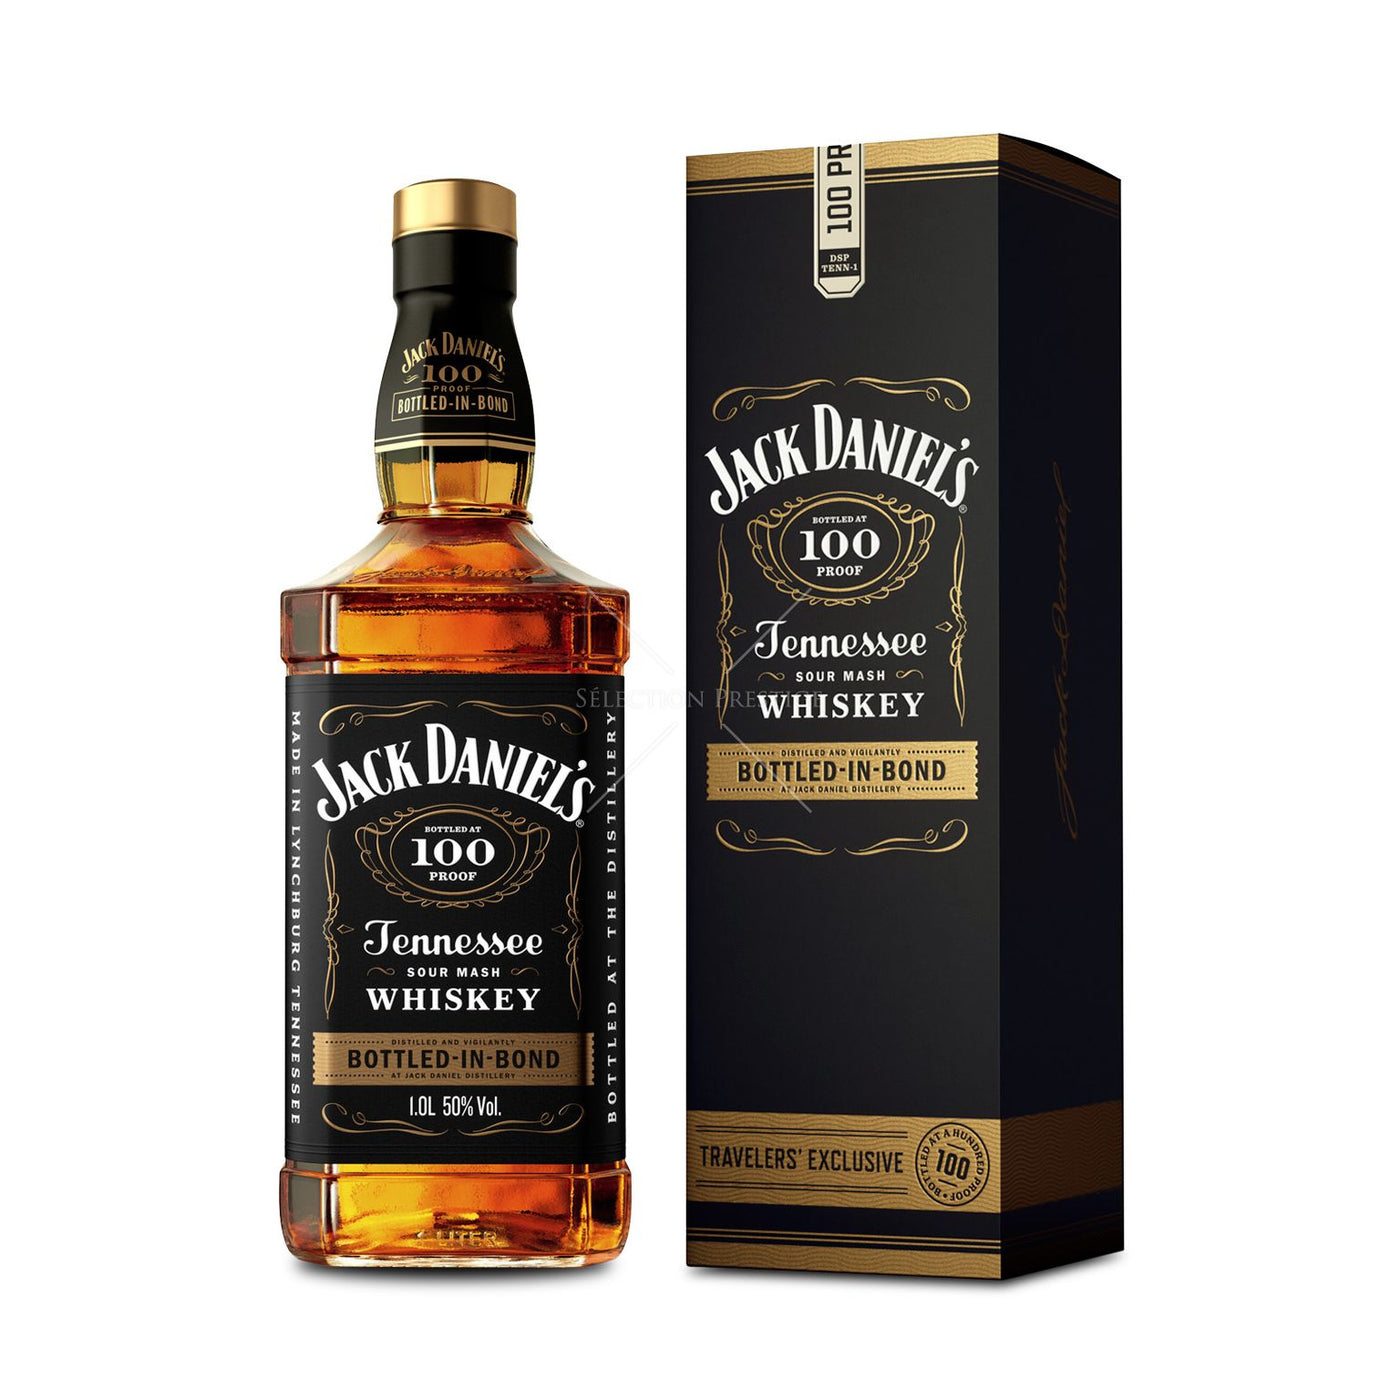 Jack Daniel's Bonded Tennessee Whiskey 100 Proof 700ml